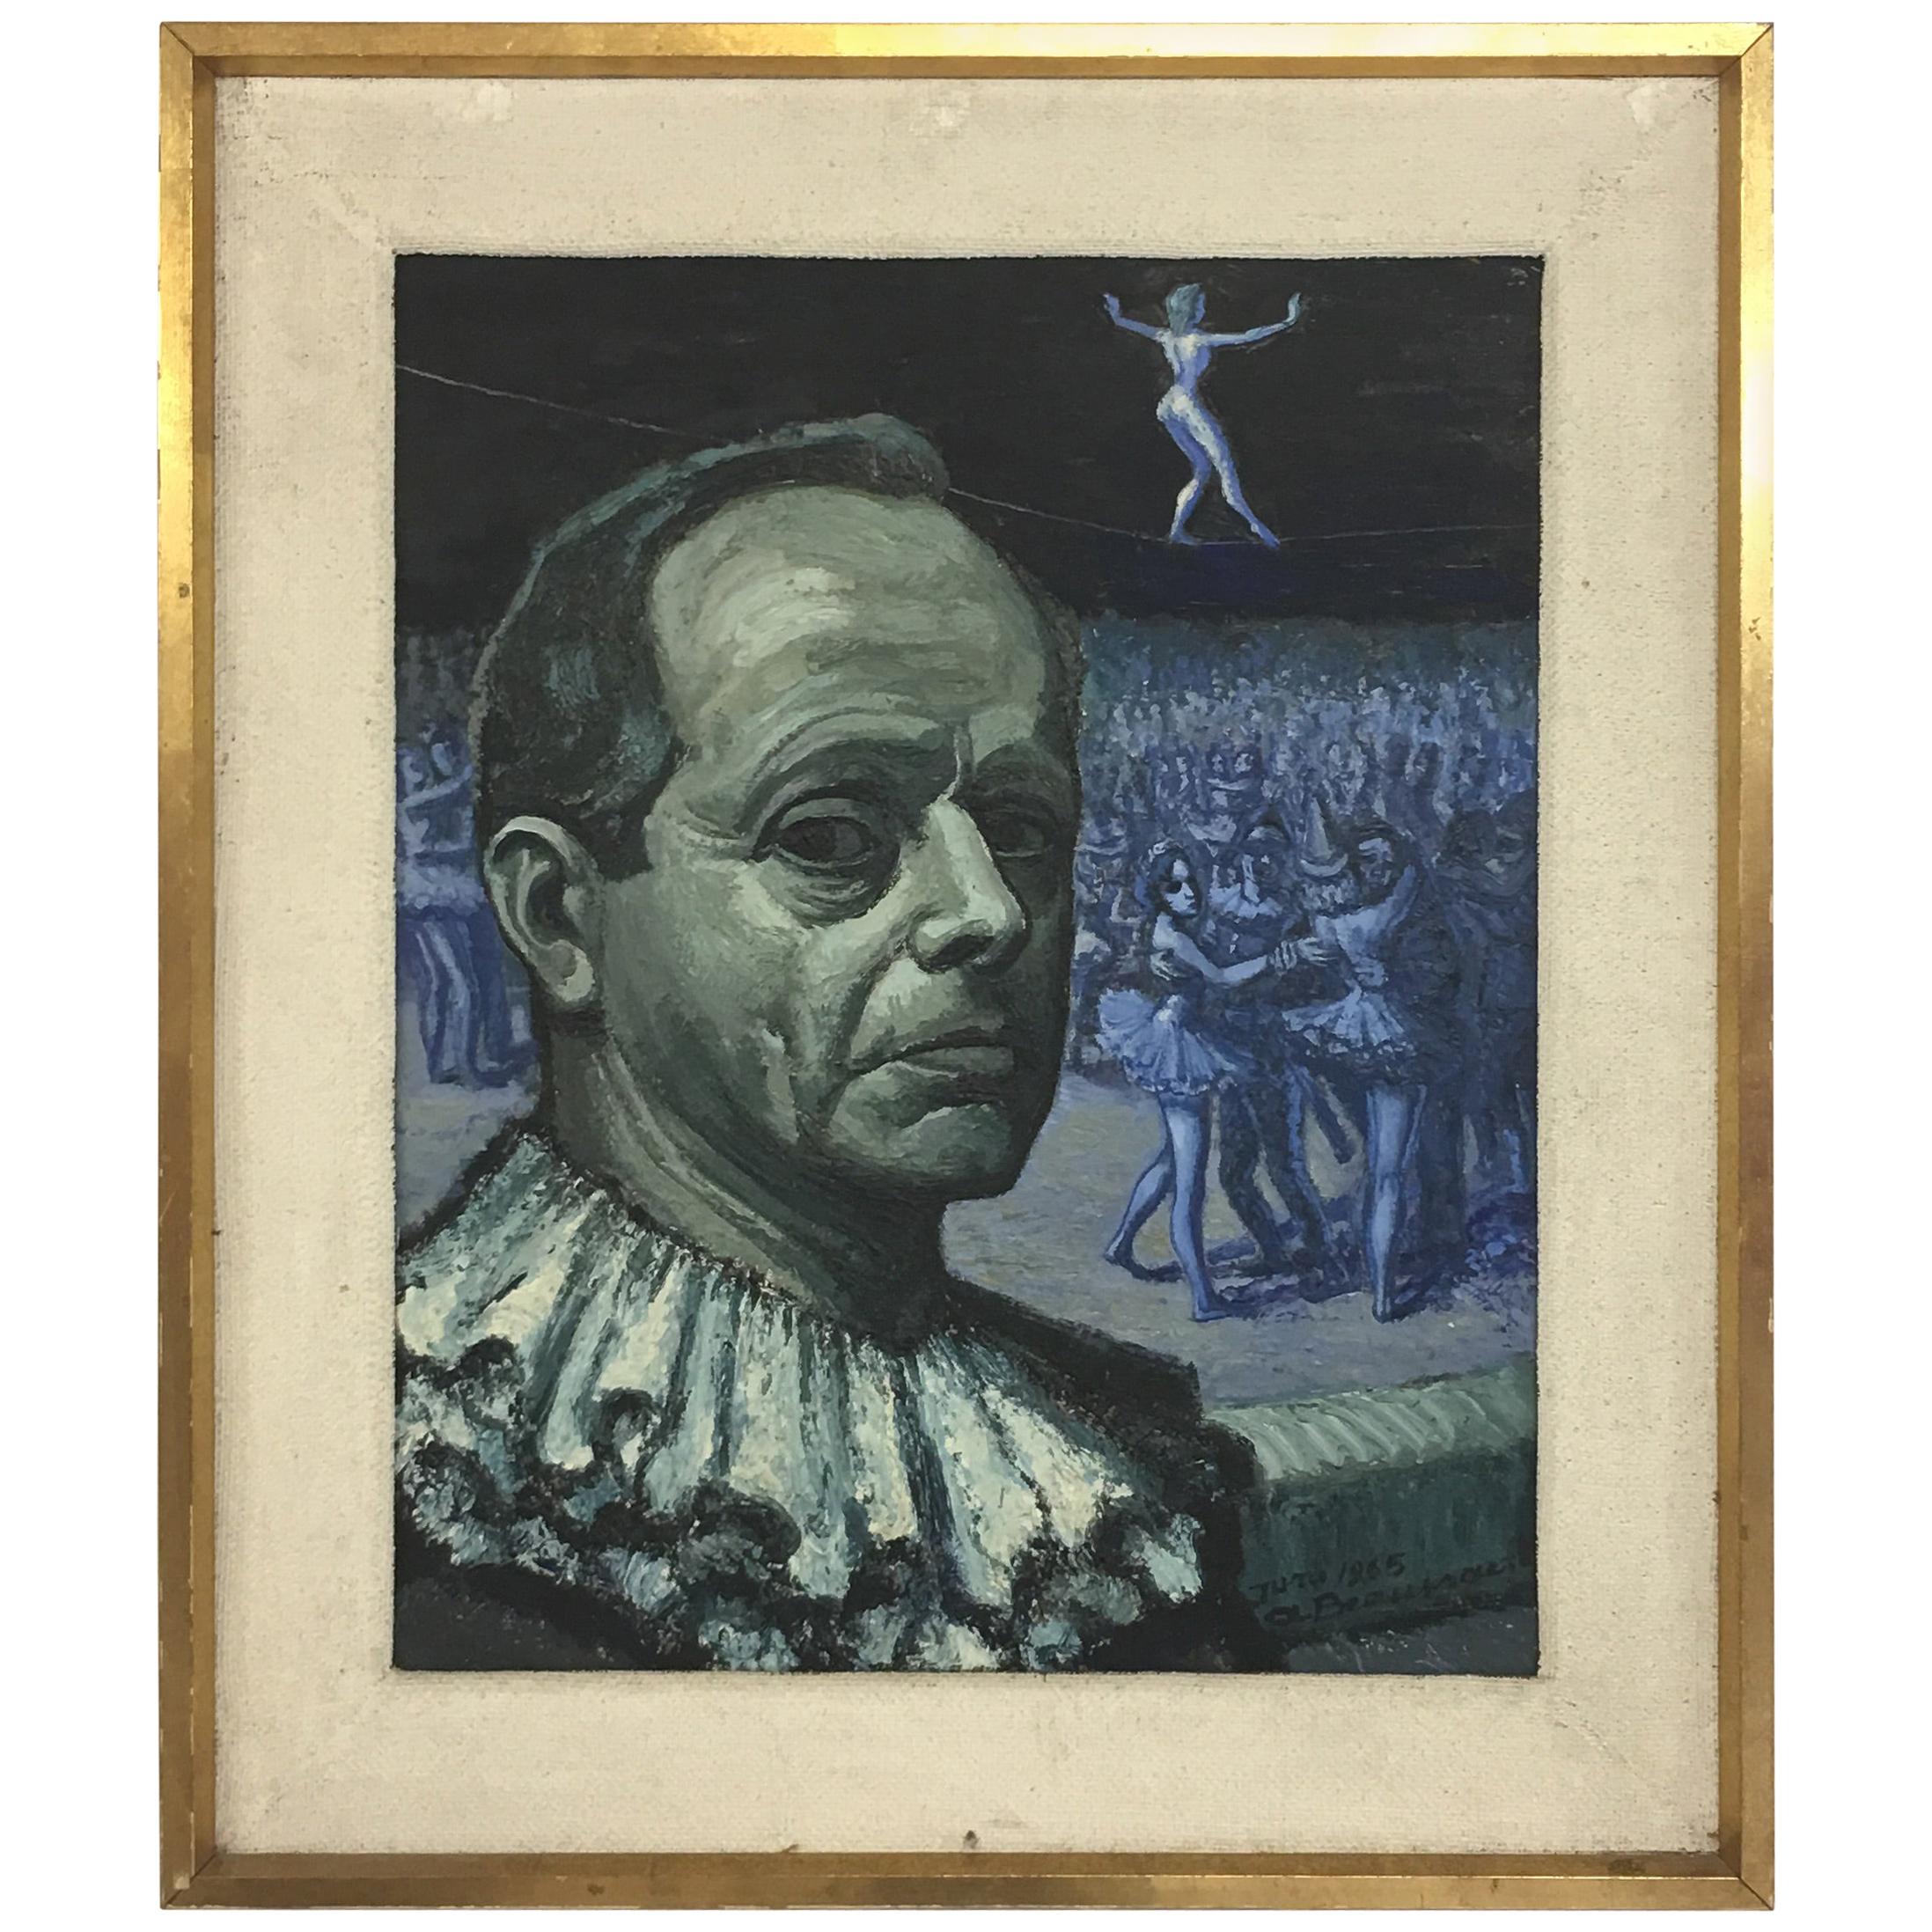 Albert Beausaert "Self portret", Signed and Dated 1965